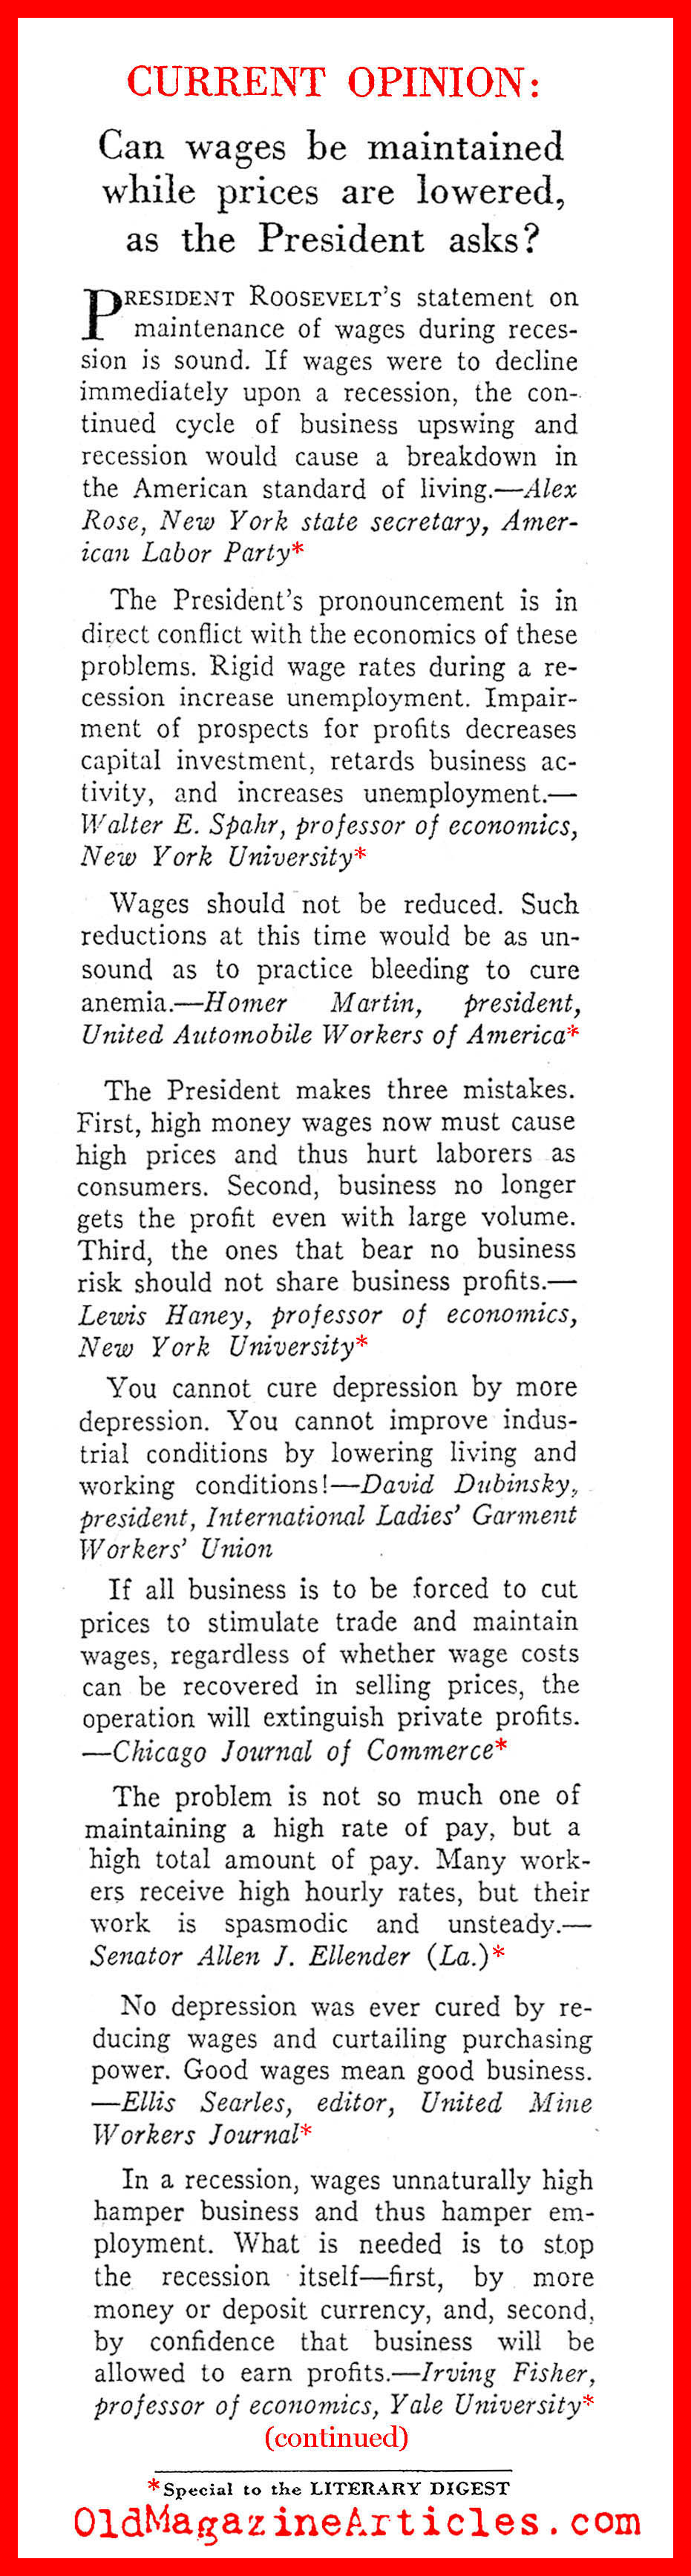 FDR on  Wage Reduction (Literary Digest, 1938)